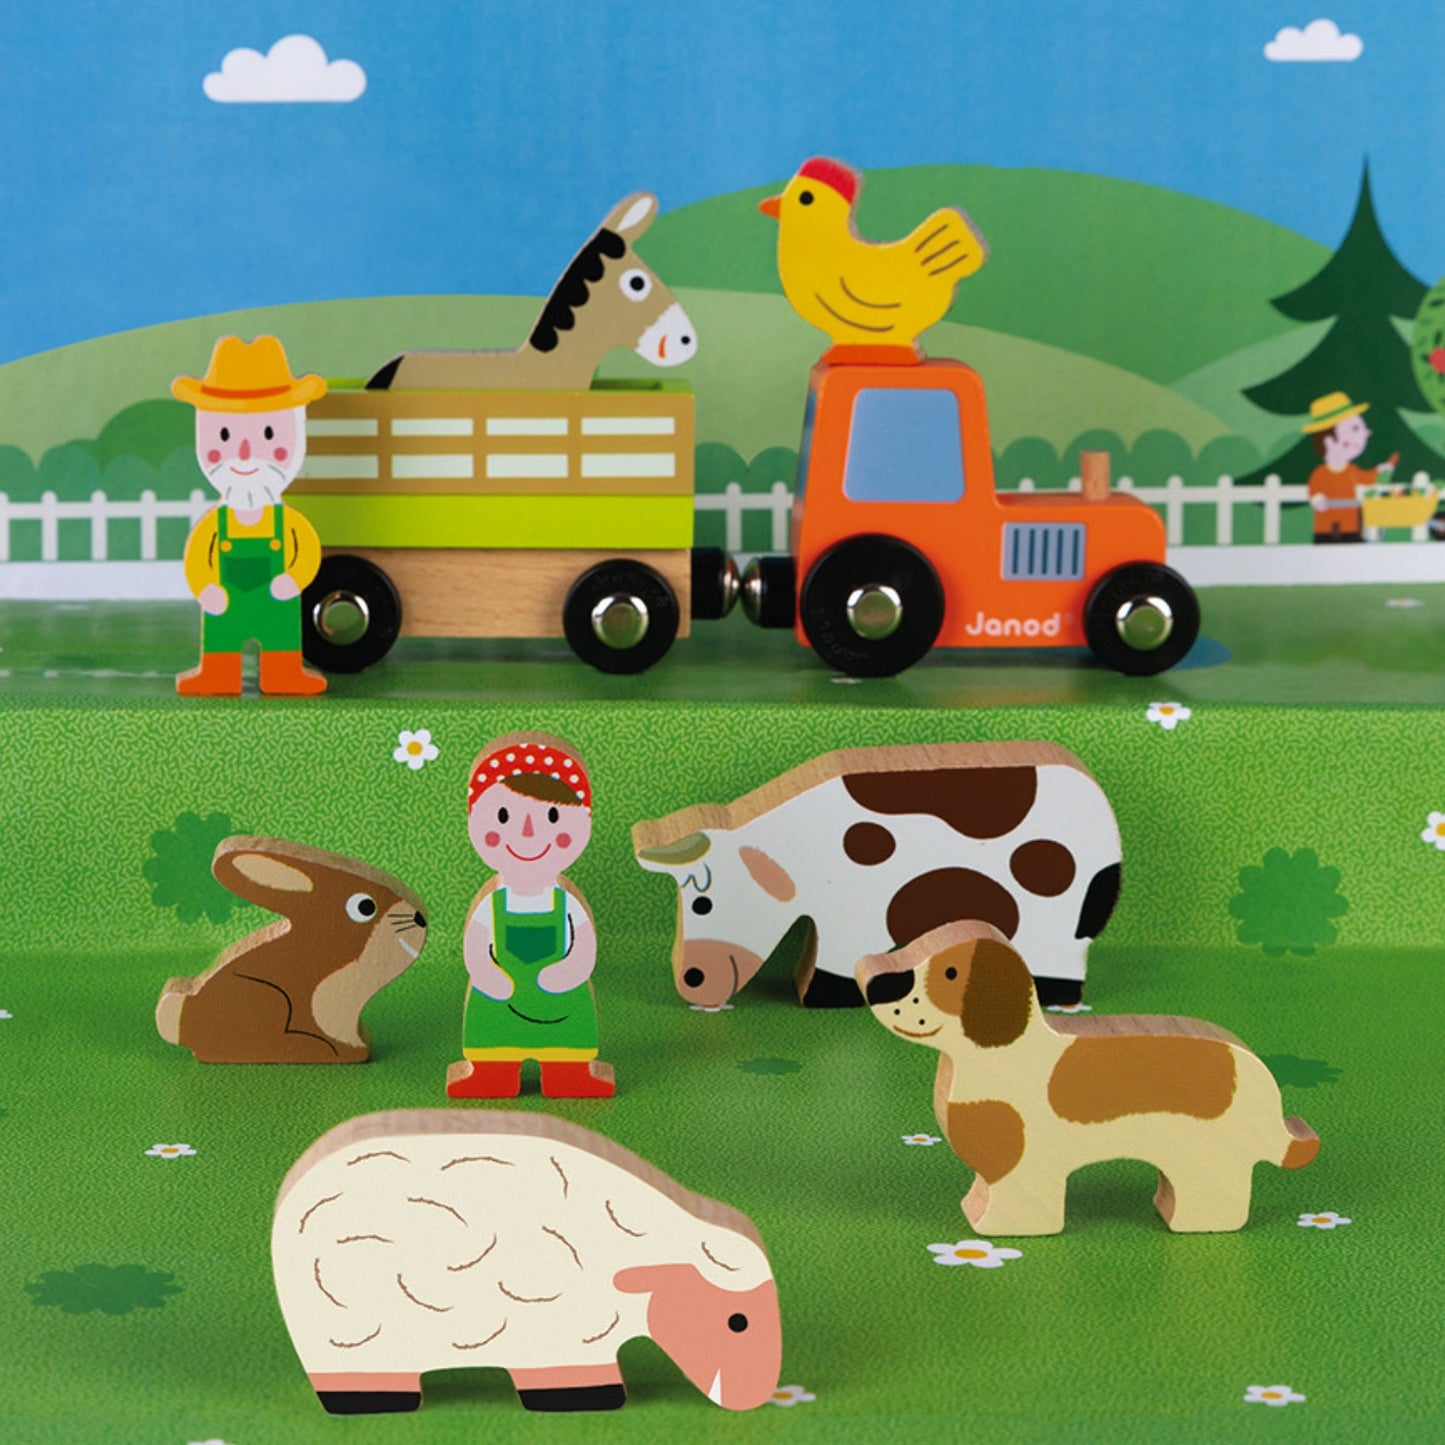 Janod Wooden Figure Farm Play Set with 10 Figures | Imaginative Play Toys | Lifestyle | BeoVERDE.ie